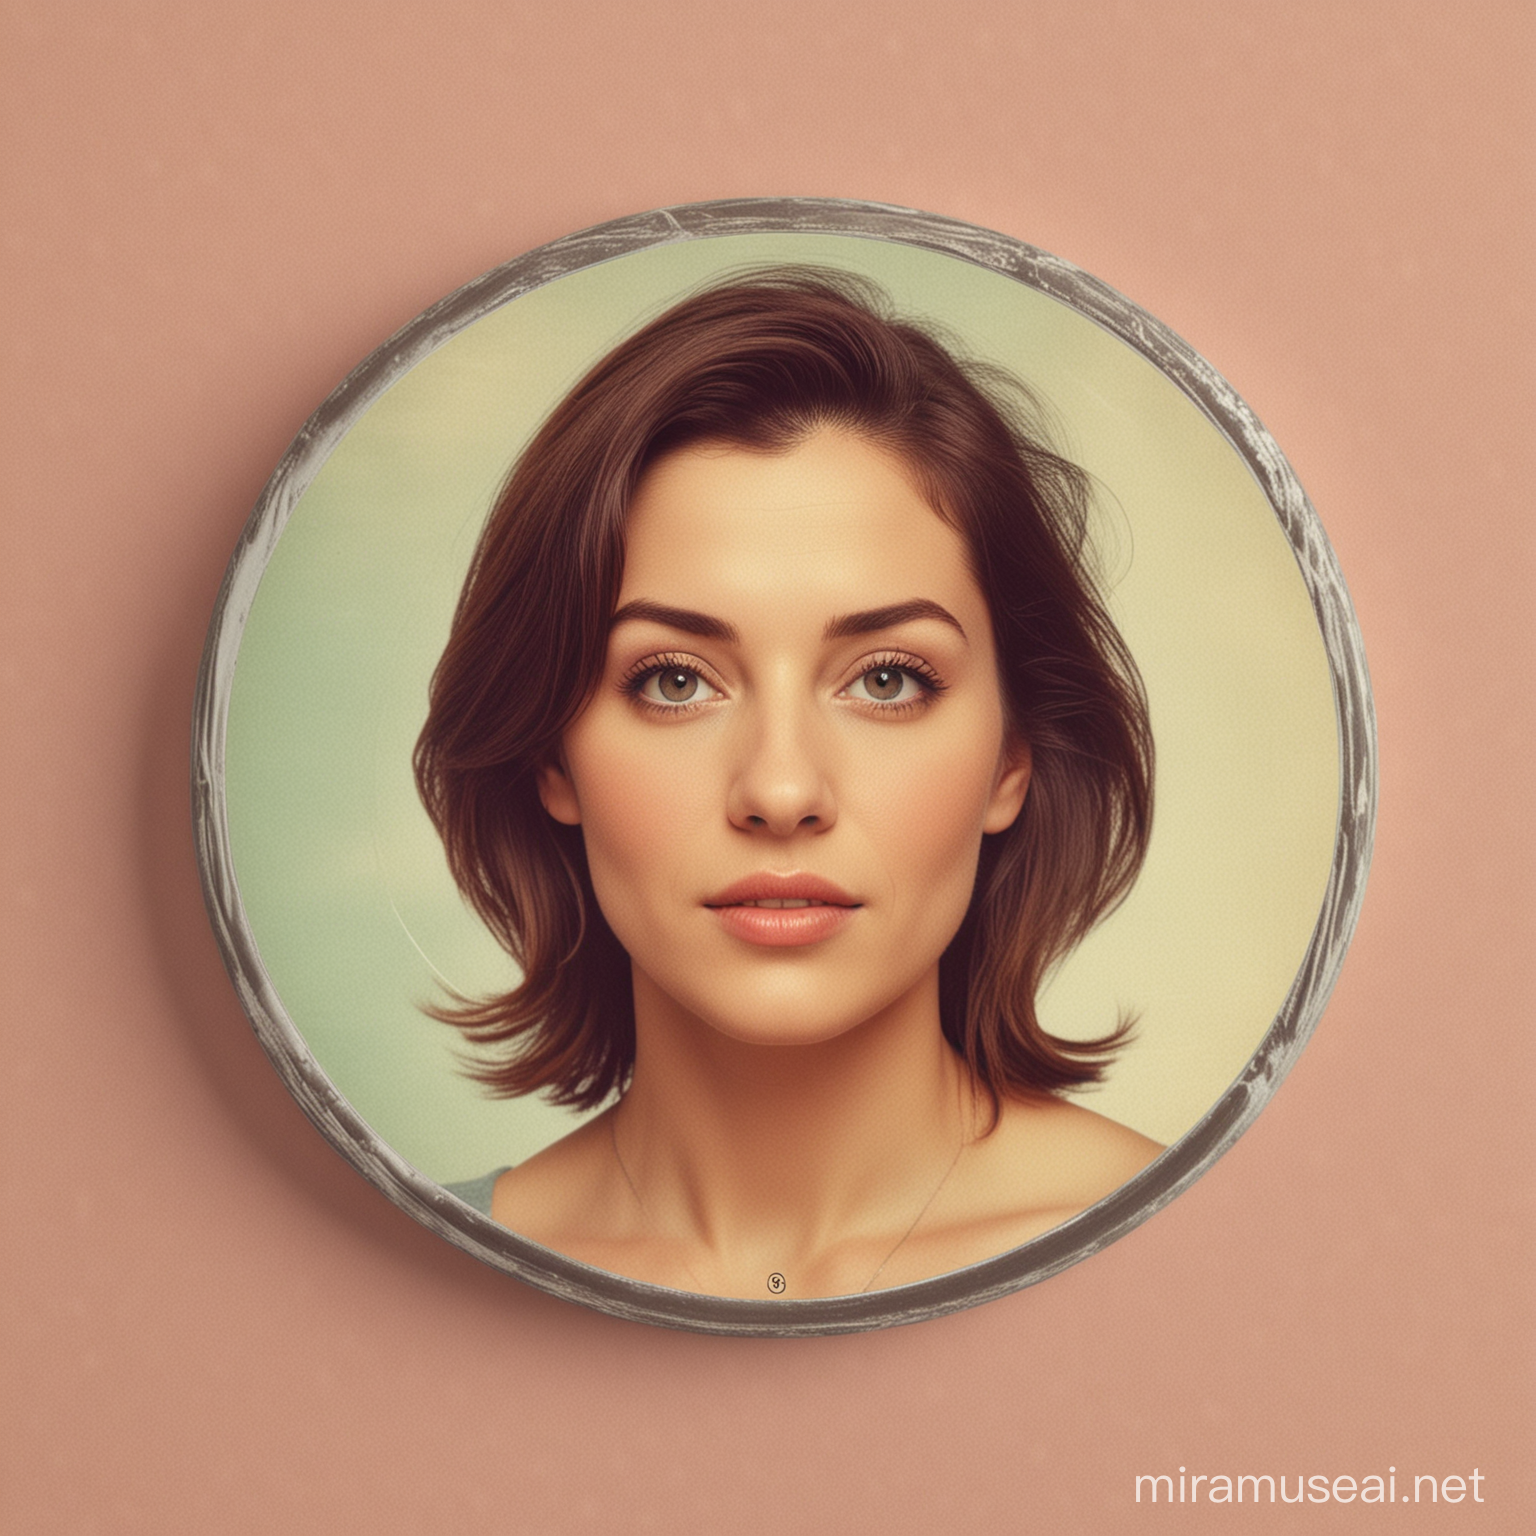 Vintage Style Woman Disc Cover in Modern Setting